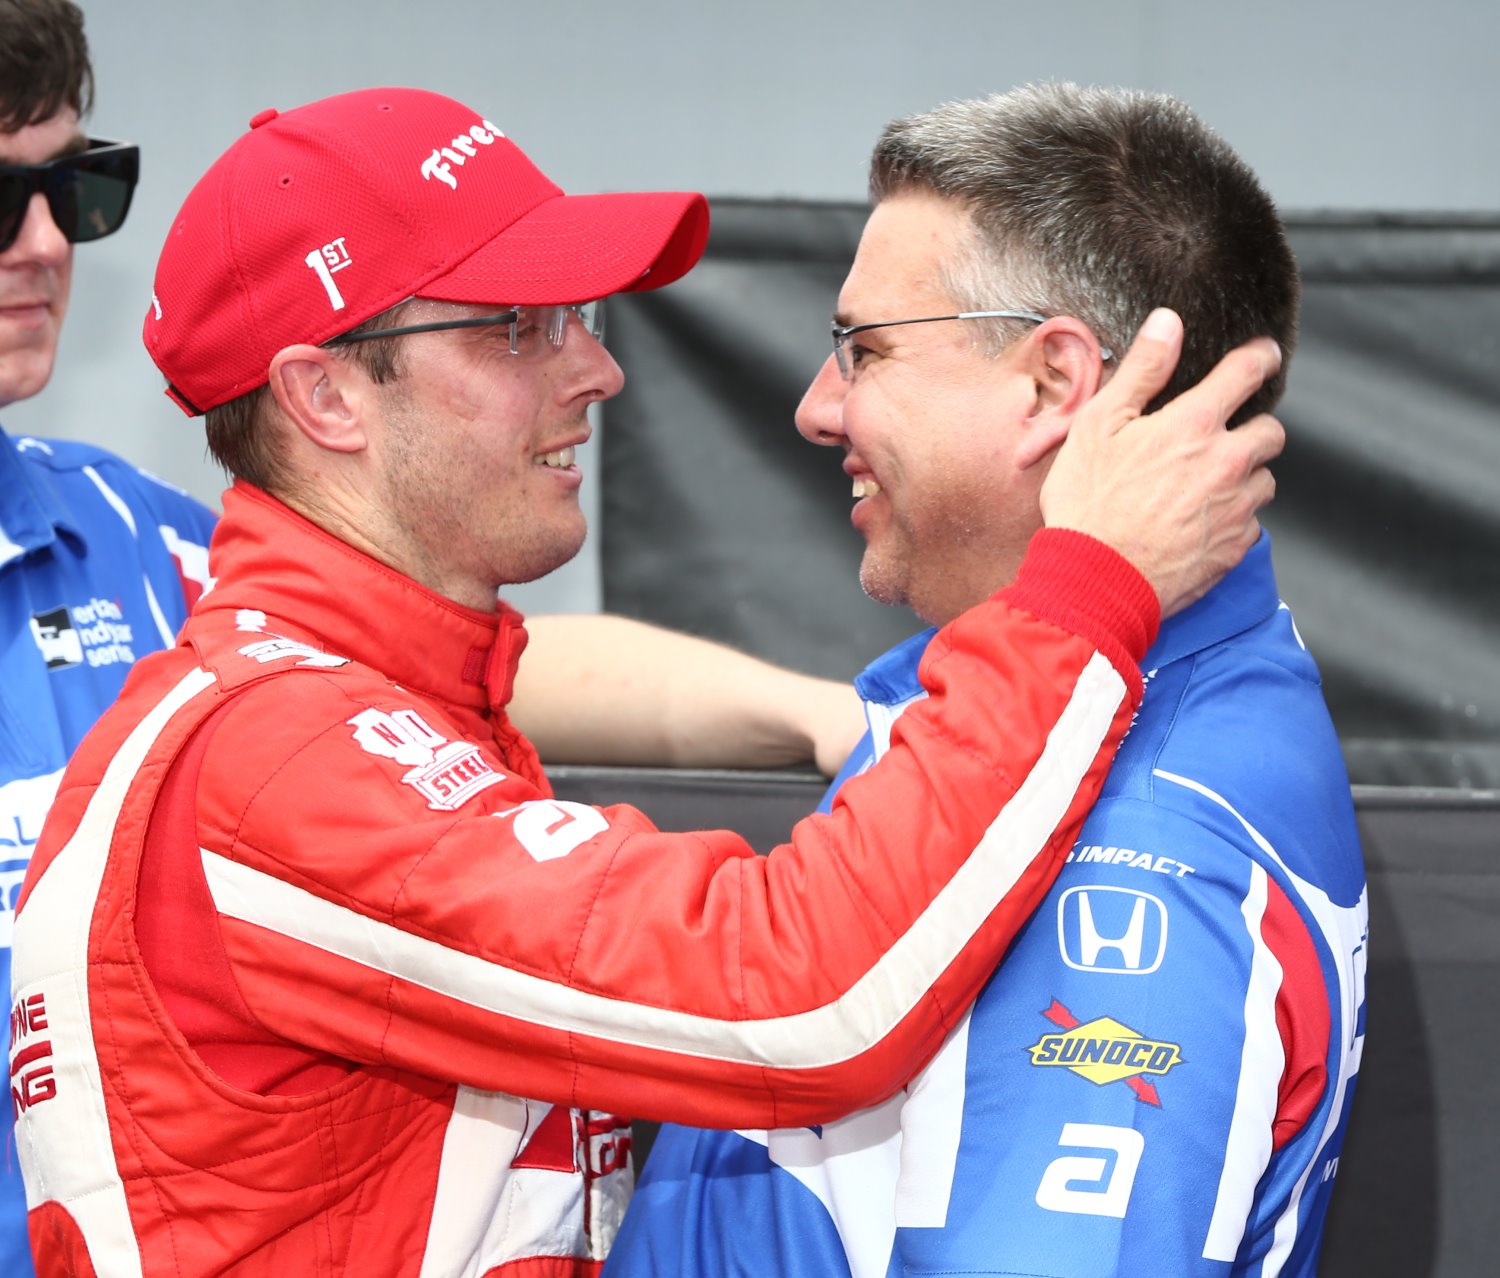 They are majic together - Sebastien Bourdais and Craig Hampson